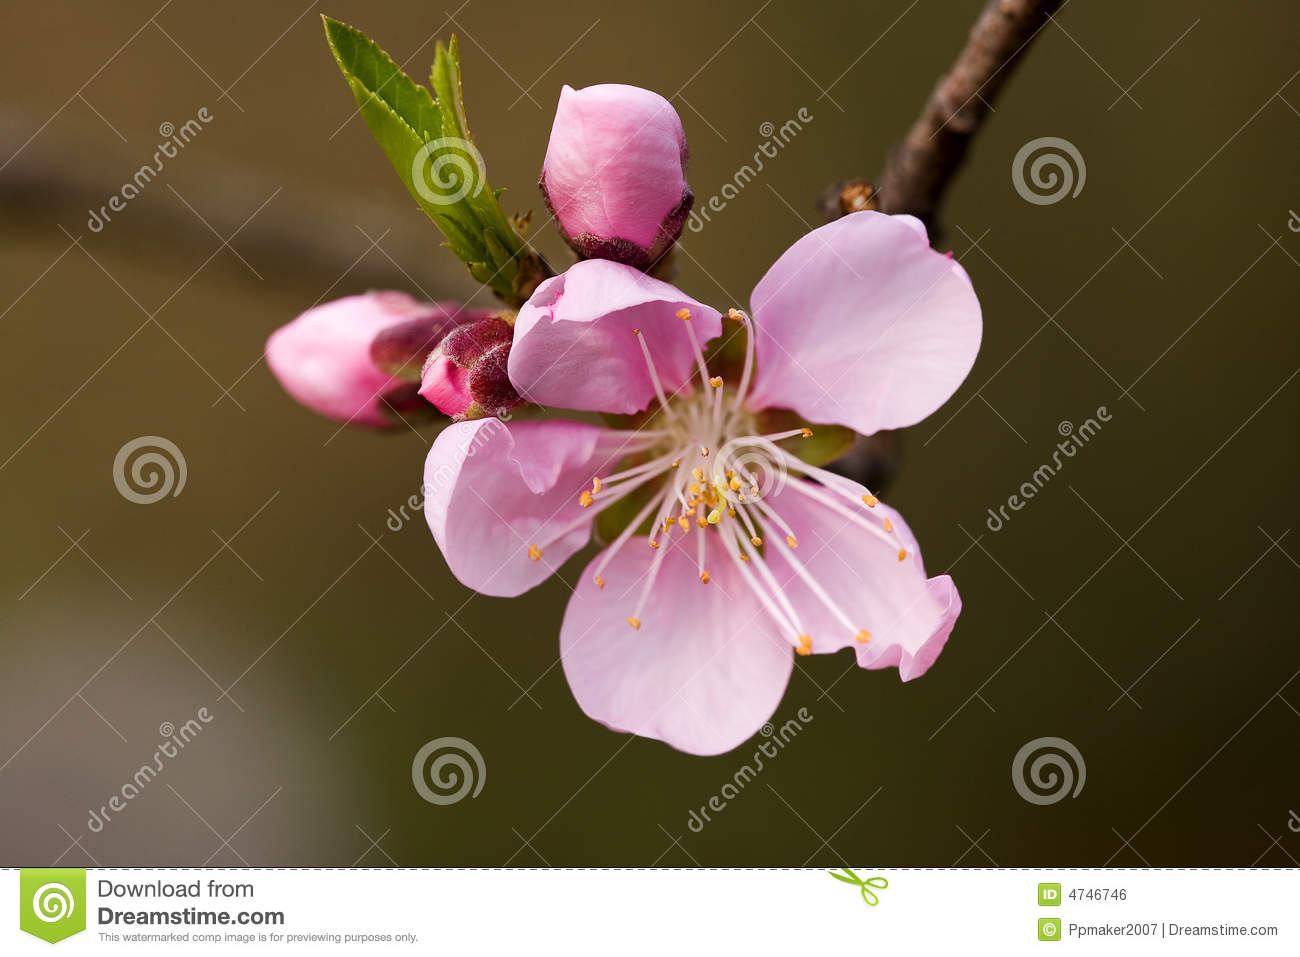 Feature Of Peach Blossom Royalty Free Stock Image   Image  4746746